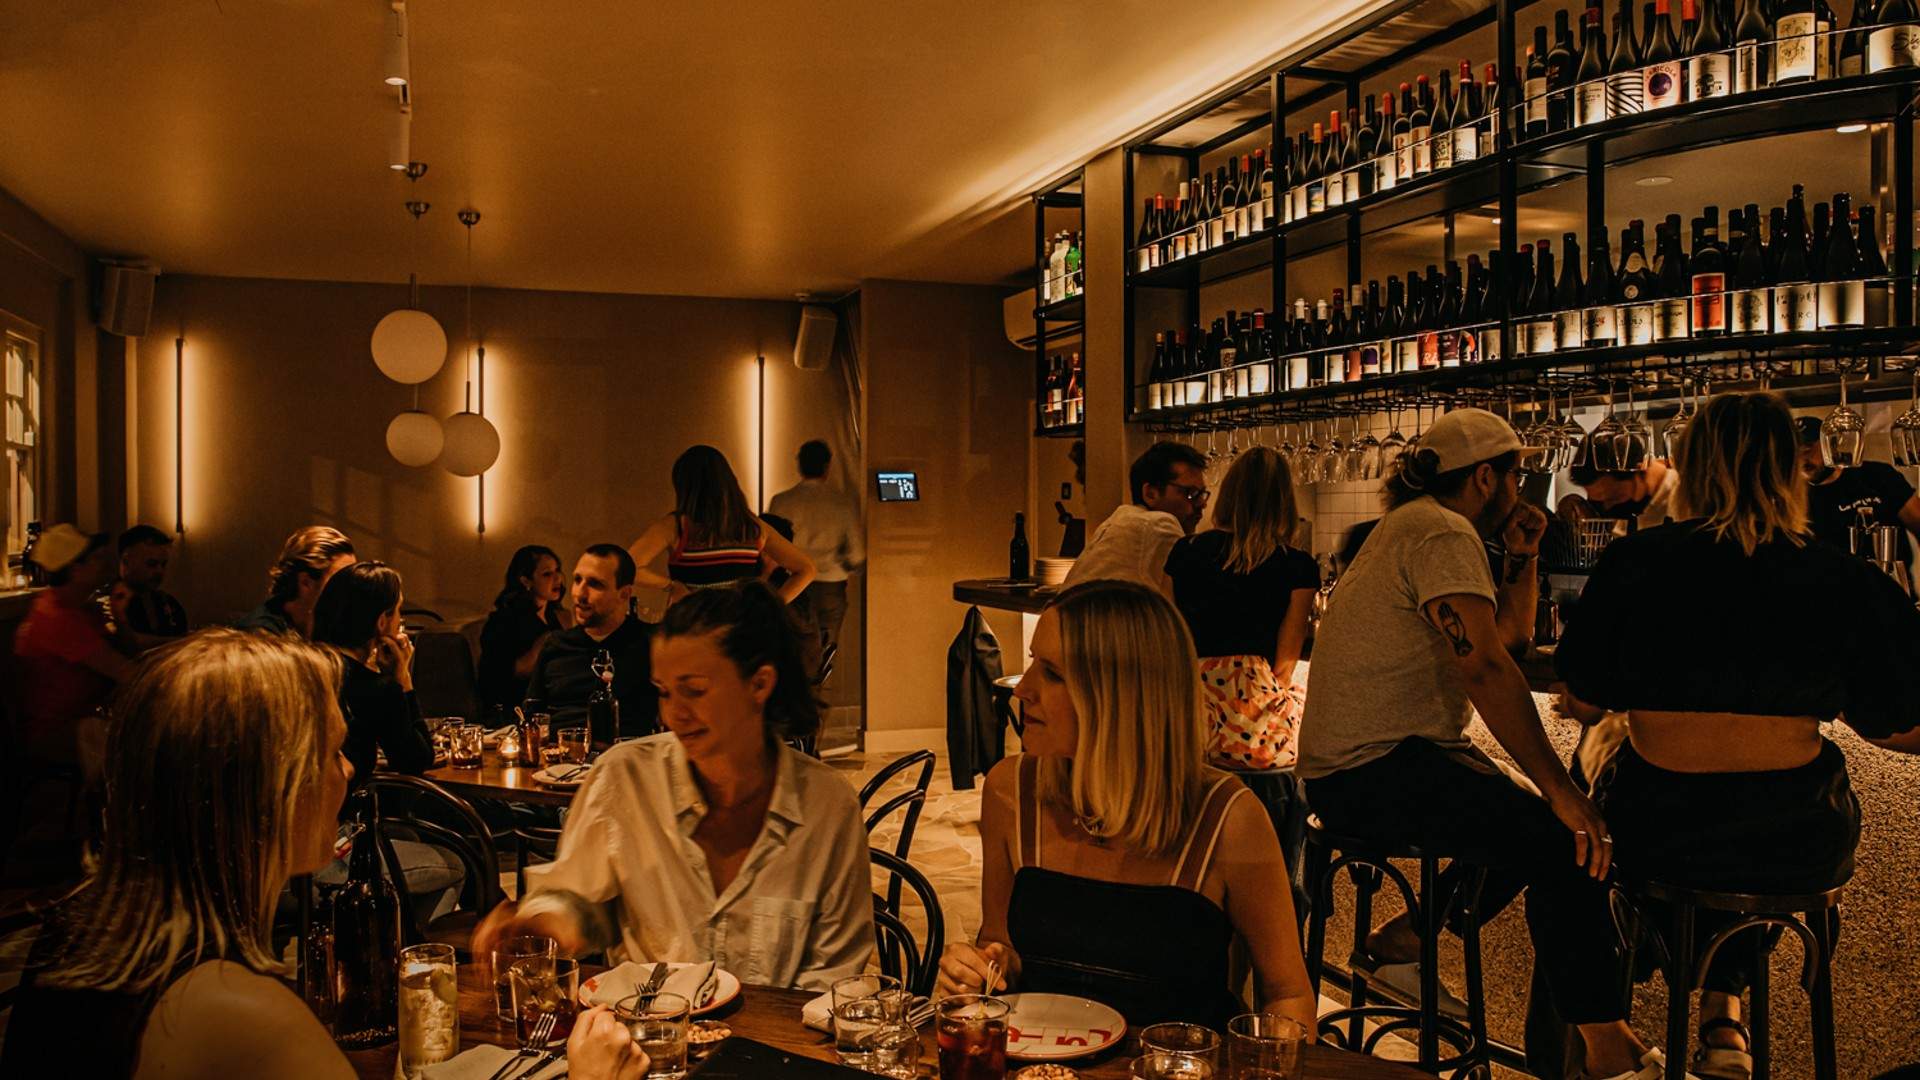 la salut - one of the best bars in sydney